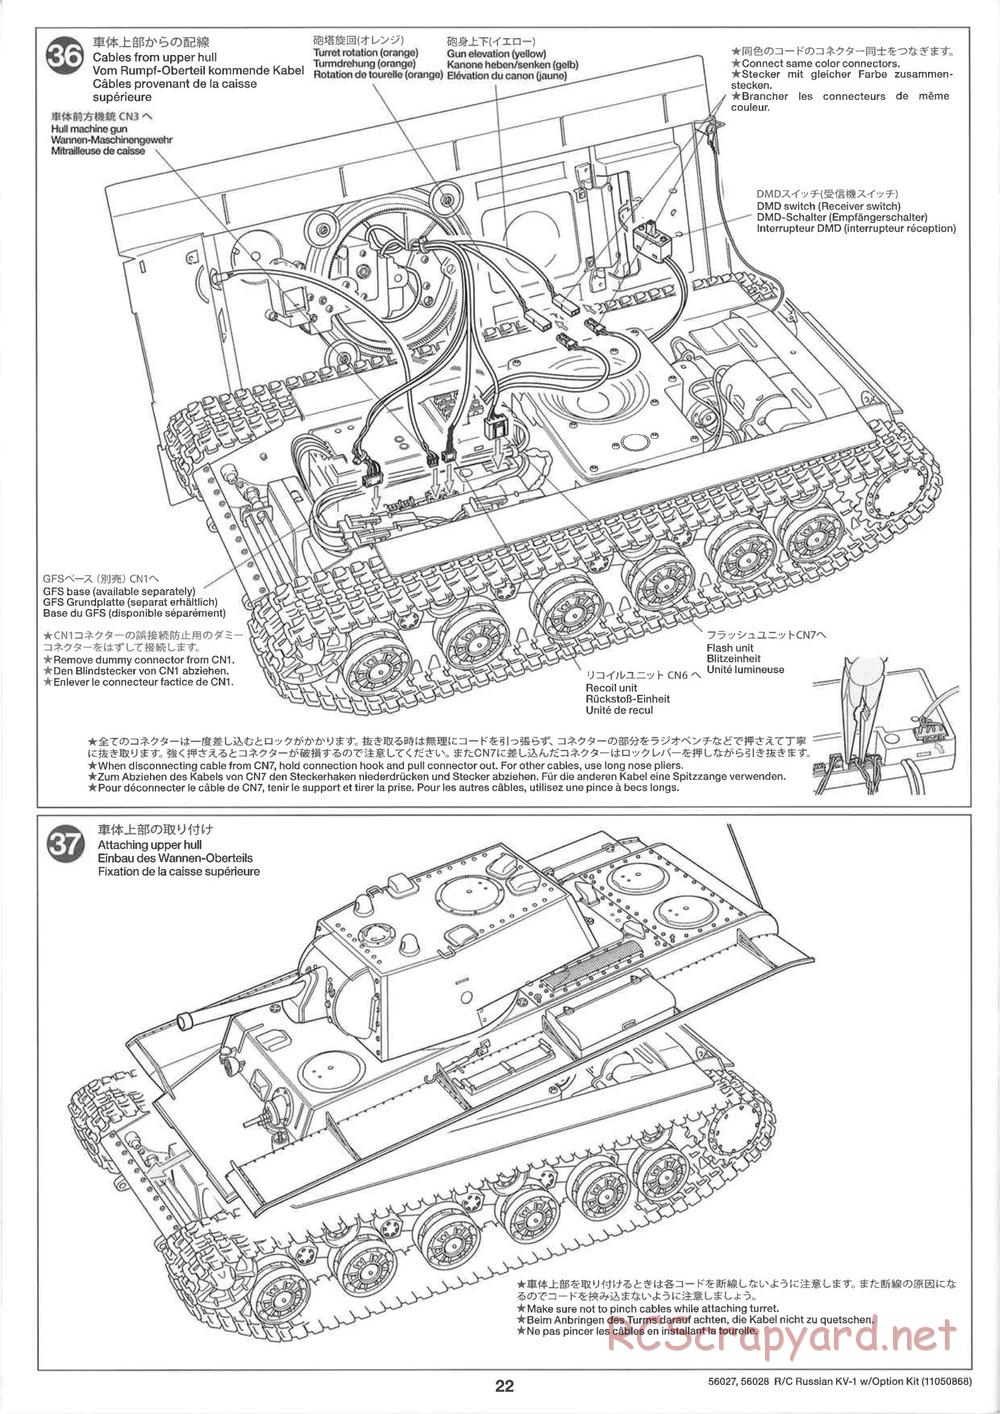 Tamiya - Russian Heavy Tank KV-1 - 1/16 Scale Chassis - Manual - Page 22